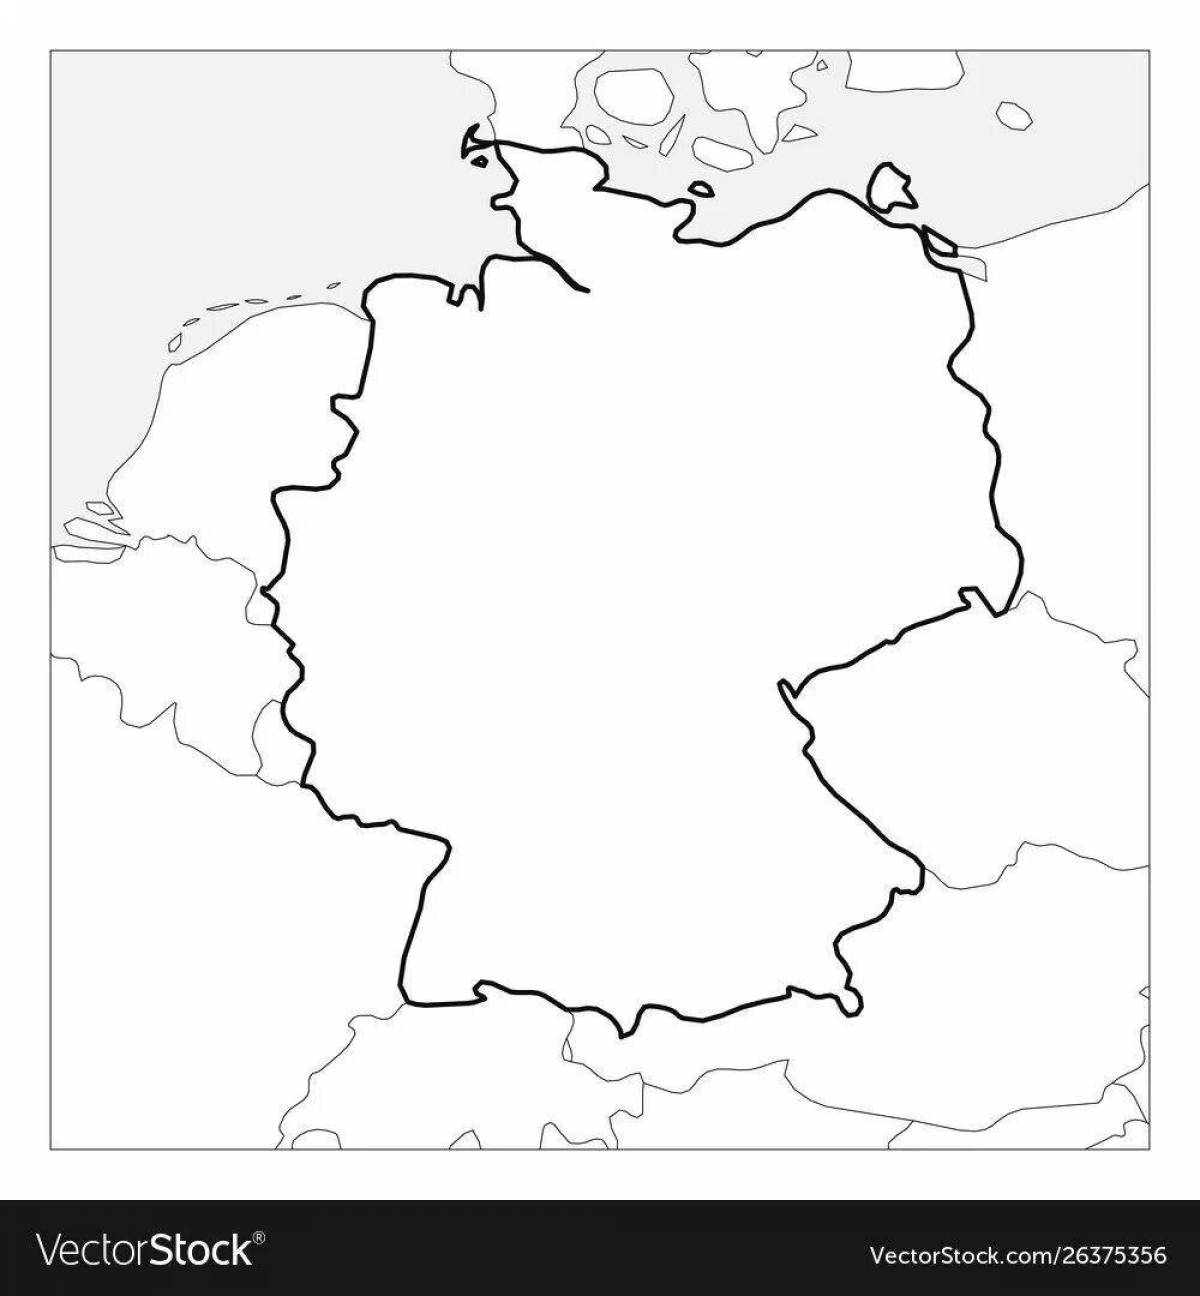 Coloring bright map of germany